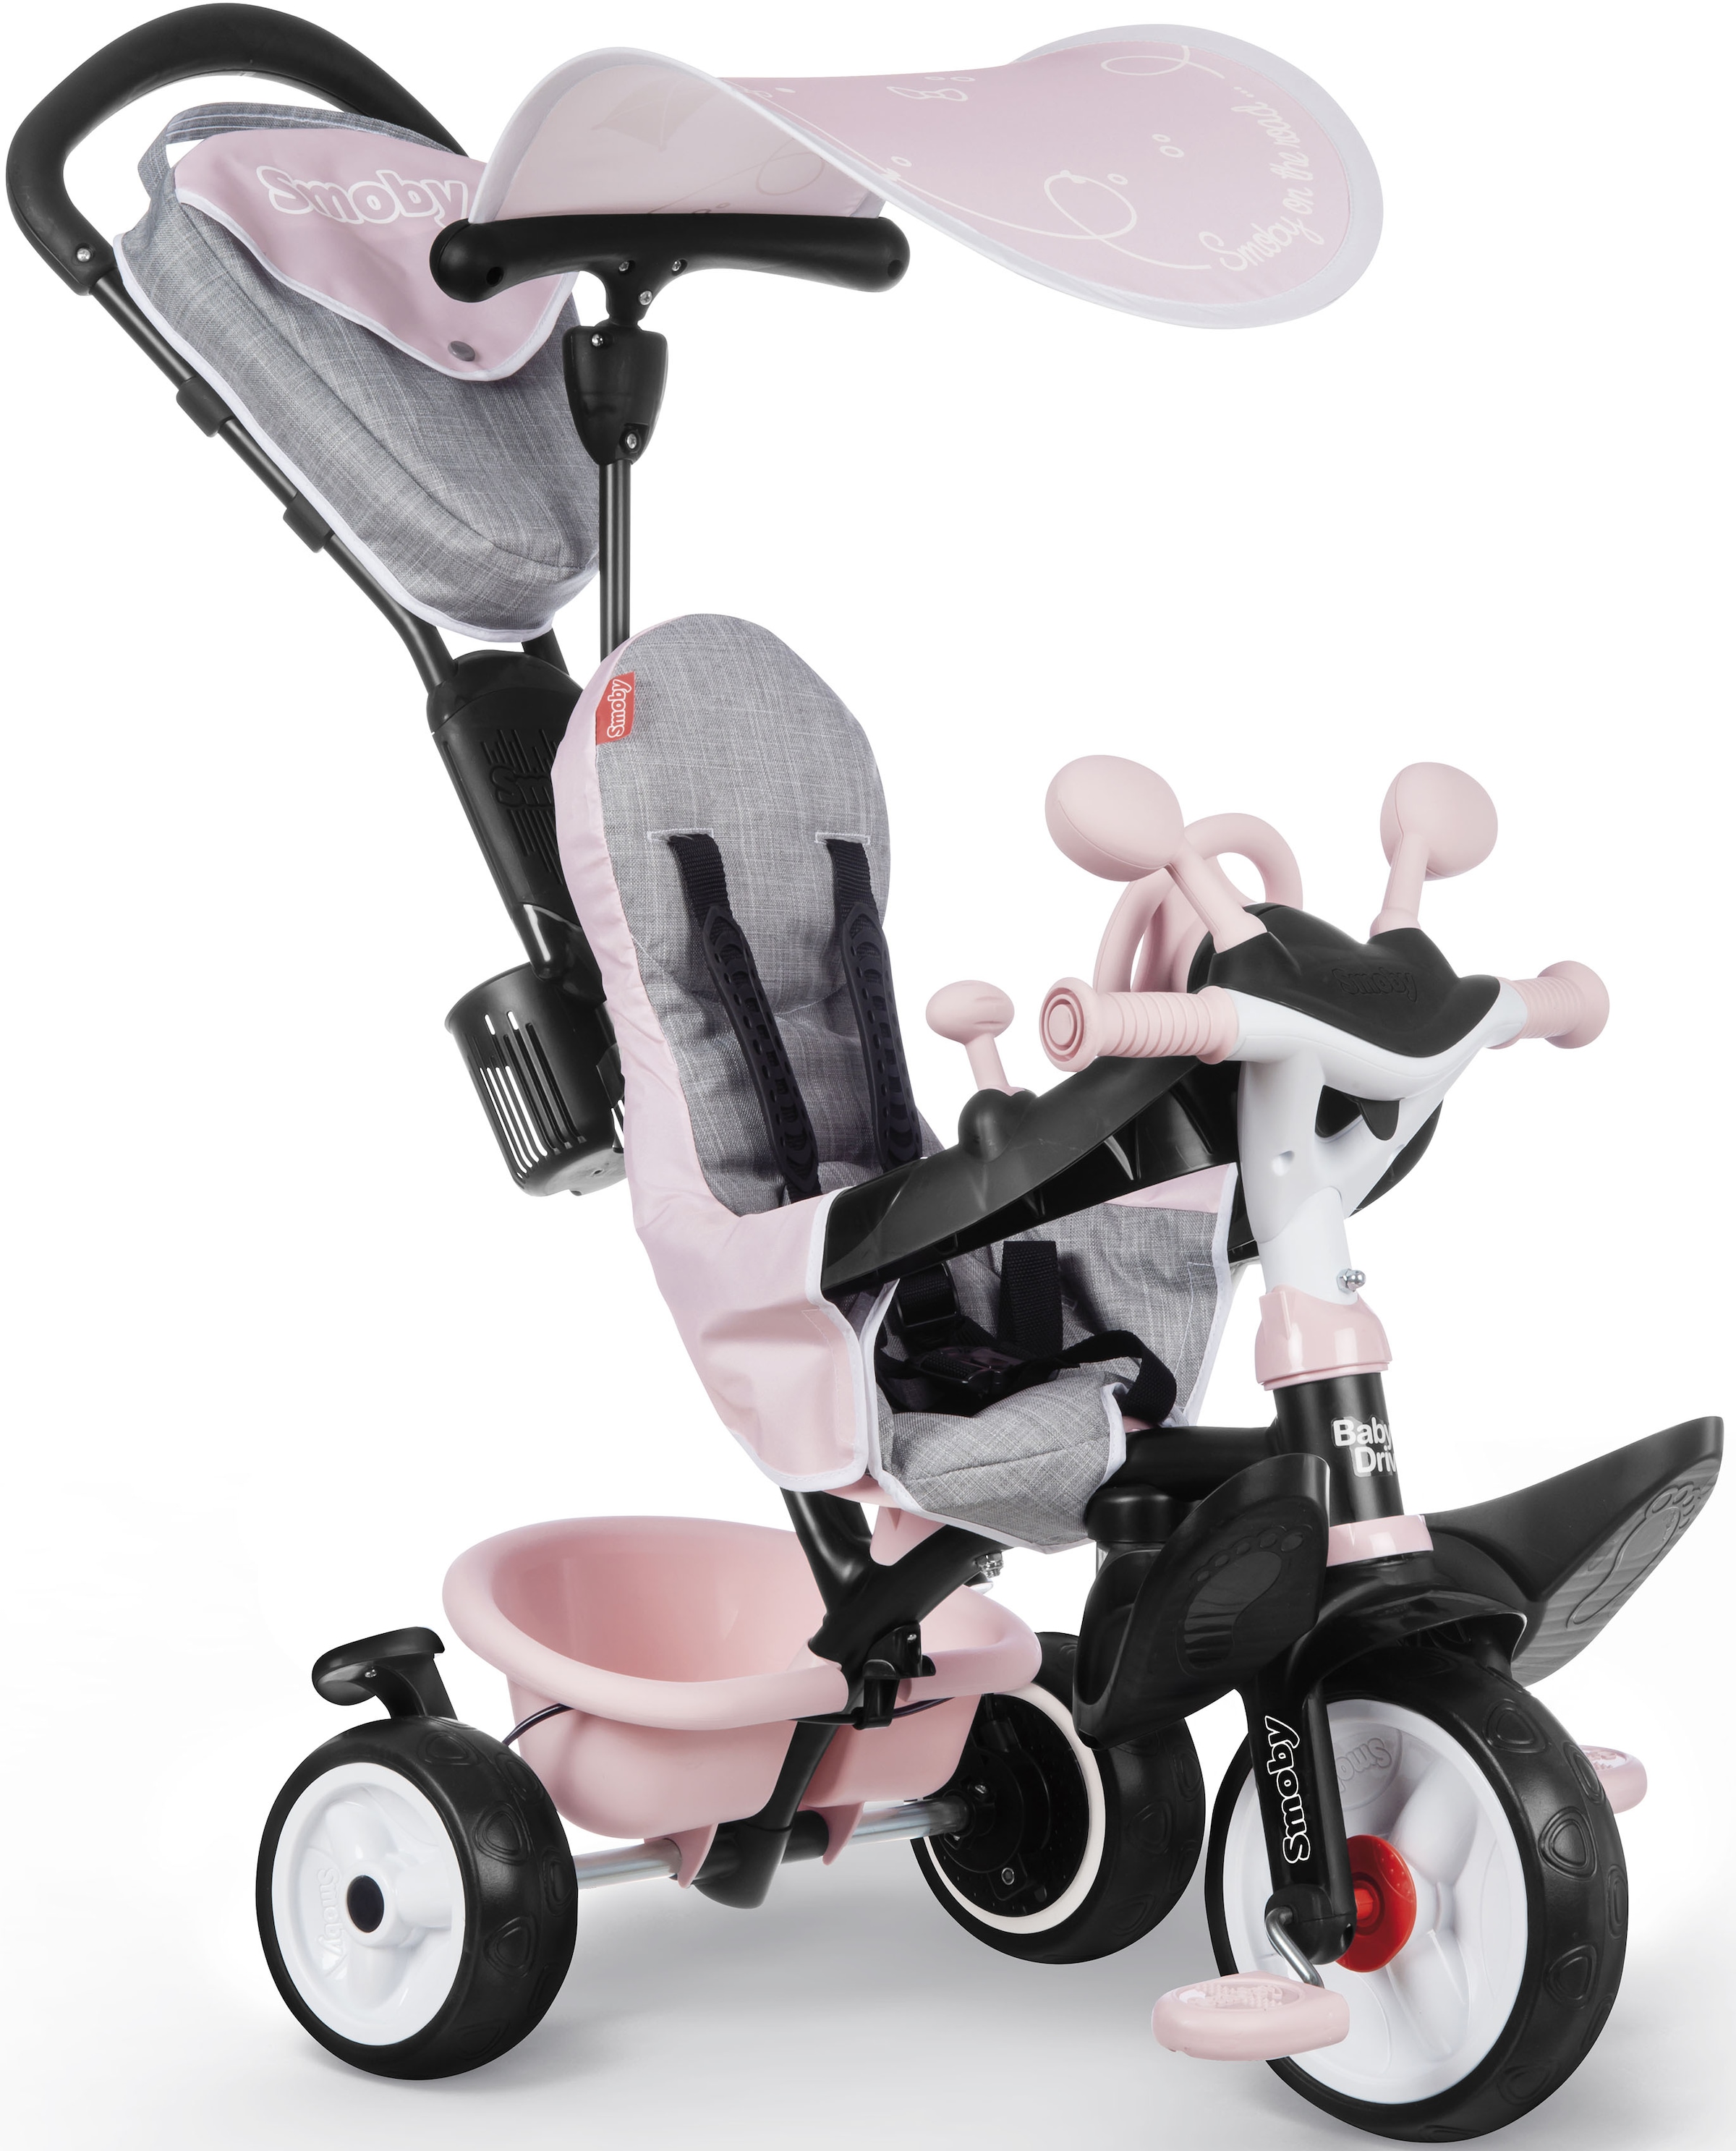 Smoby Dreirad »Baby Driver Europe Made Plus, kaufen online rosa«, in